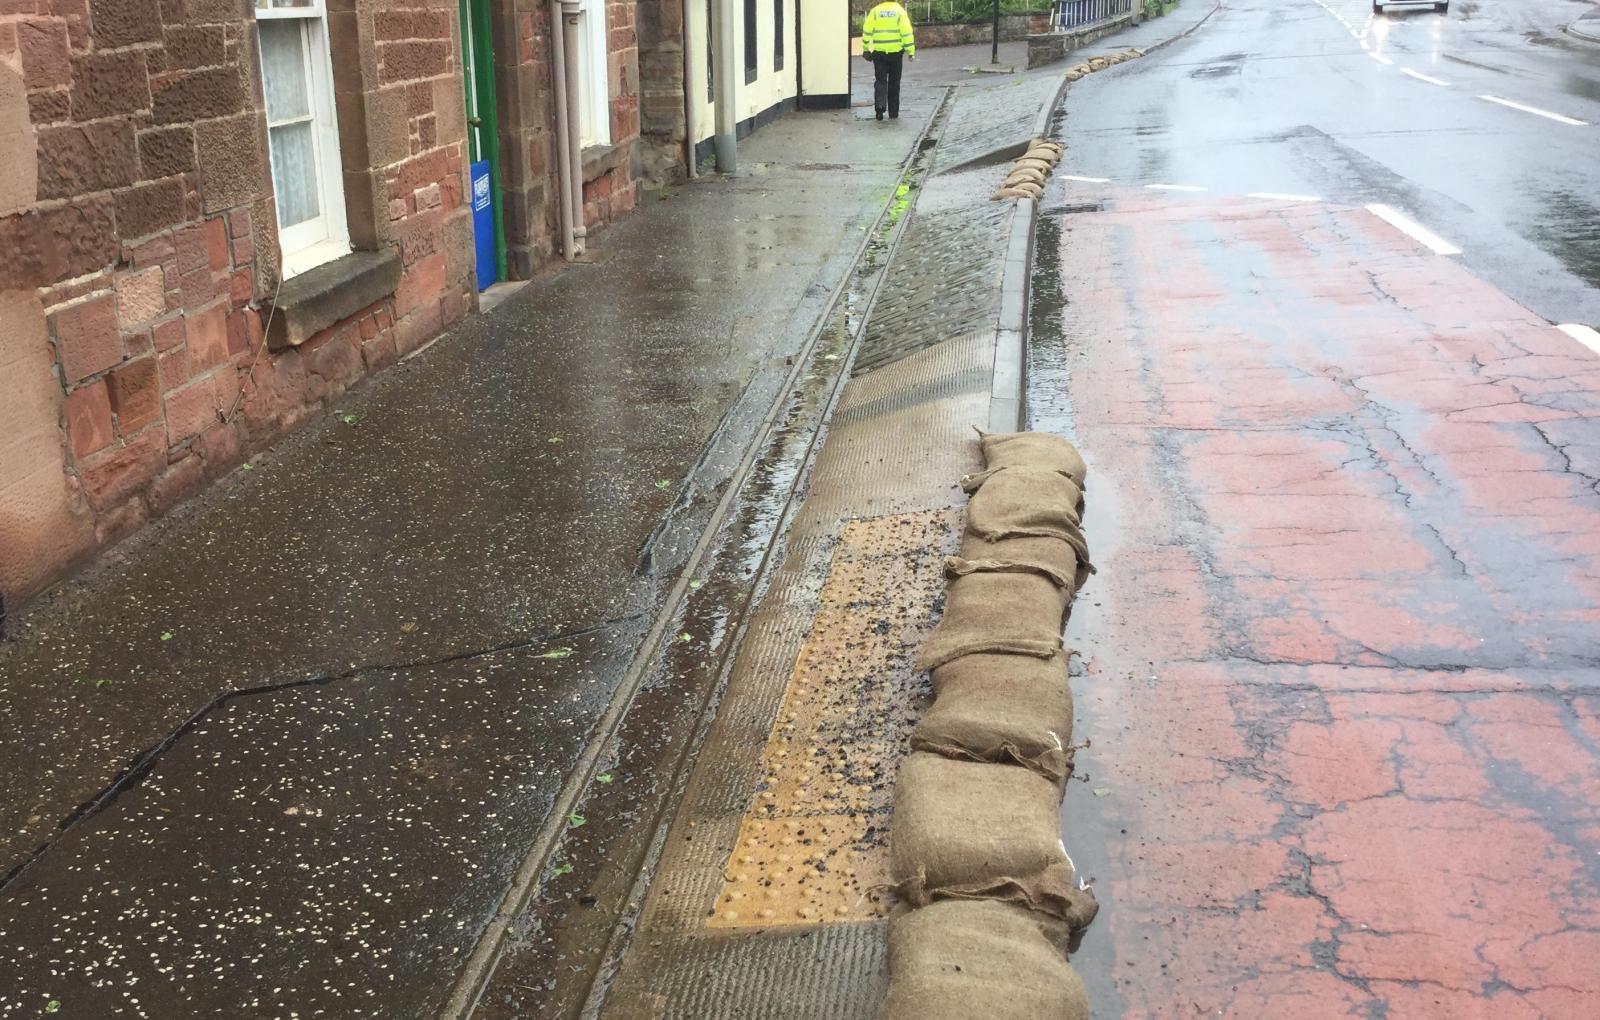 Sandbags and floodgate in use flooded road